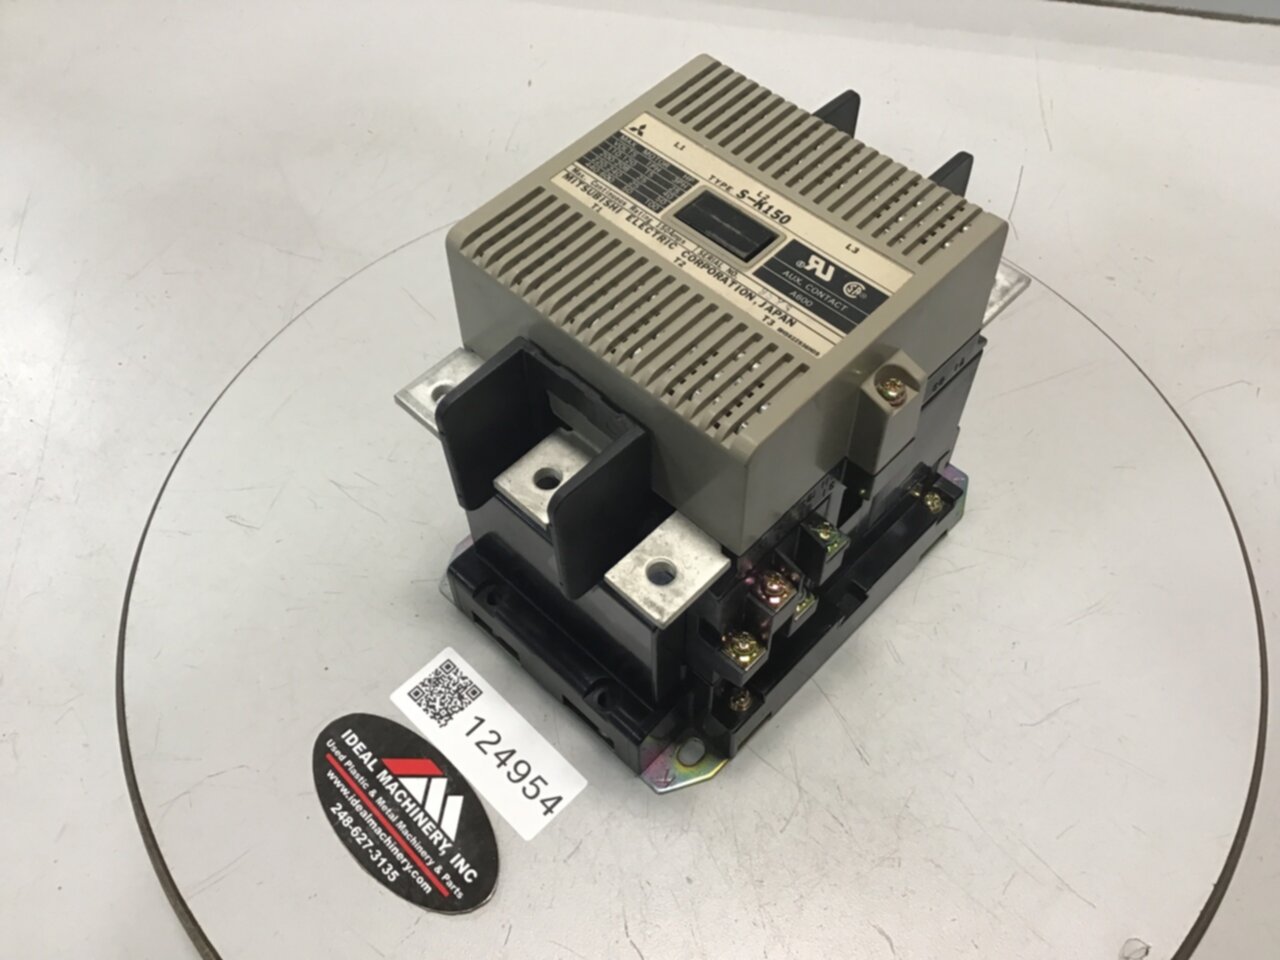 1pc Mitsubishi Magnetic Contactor S-n11 110vac GV for sale online 